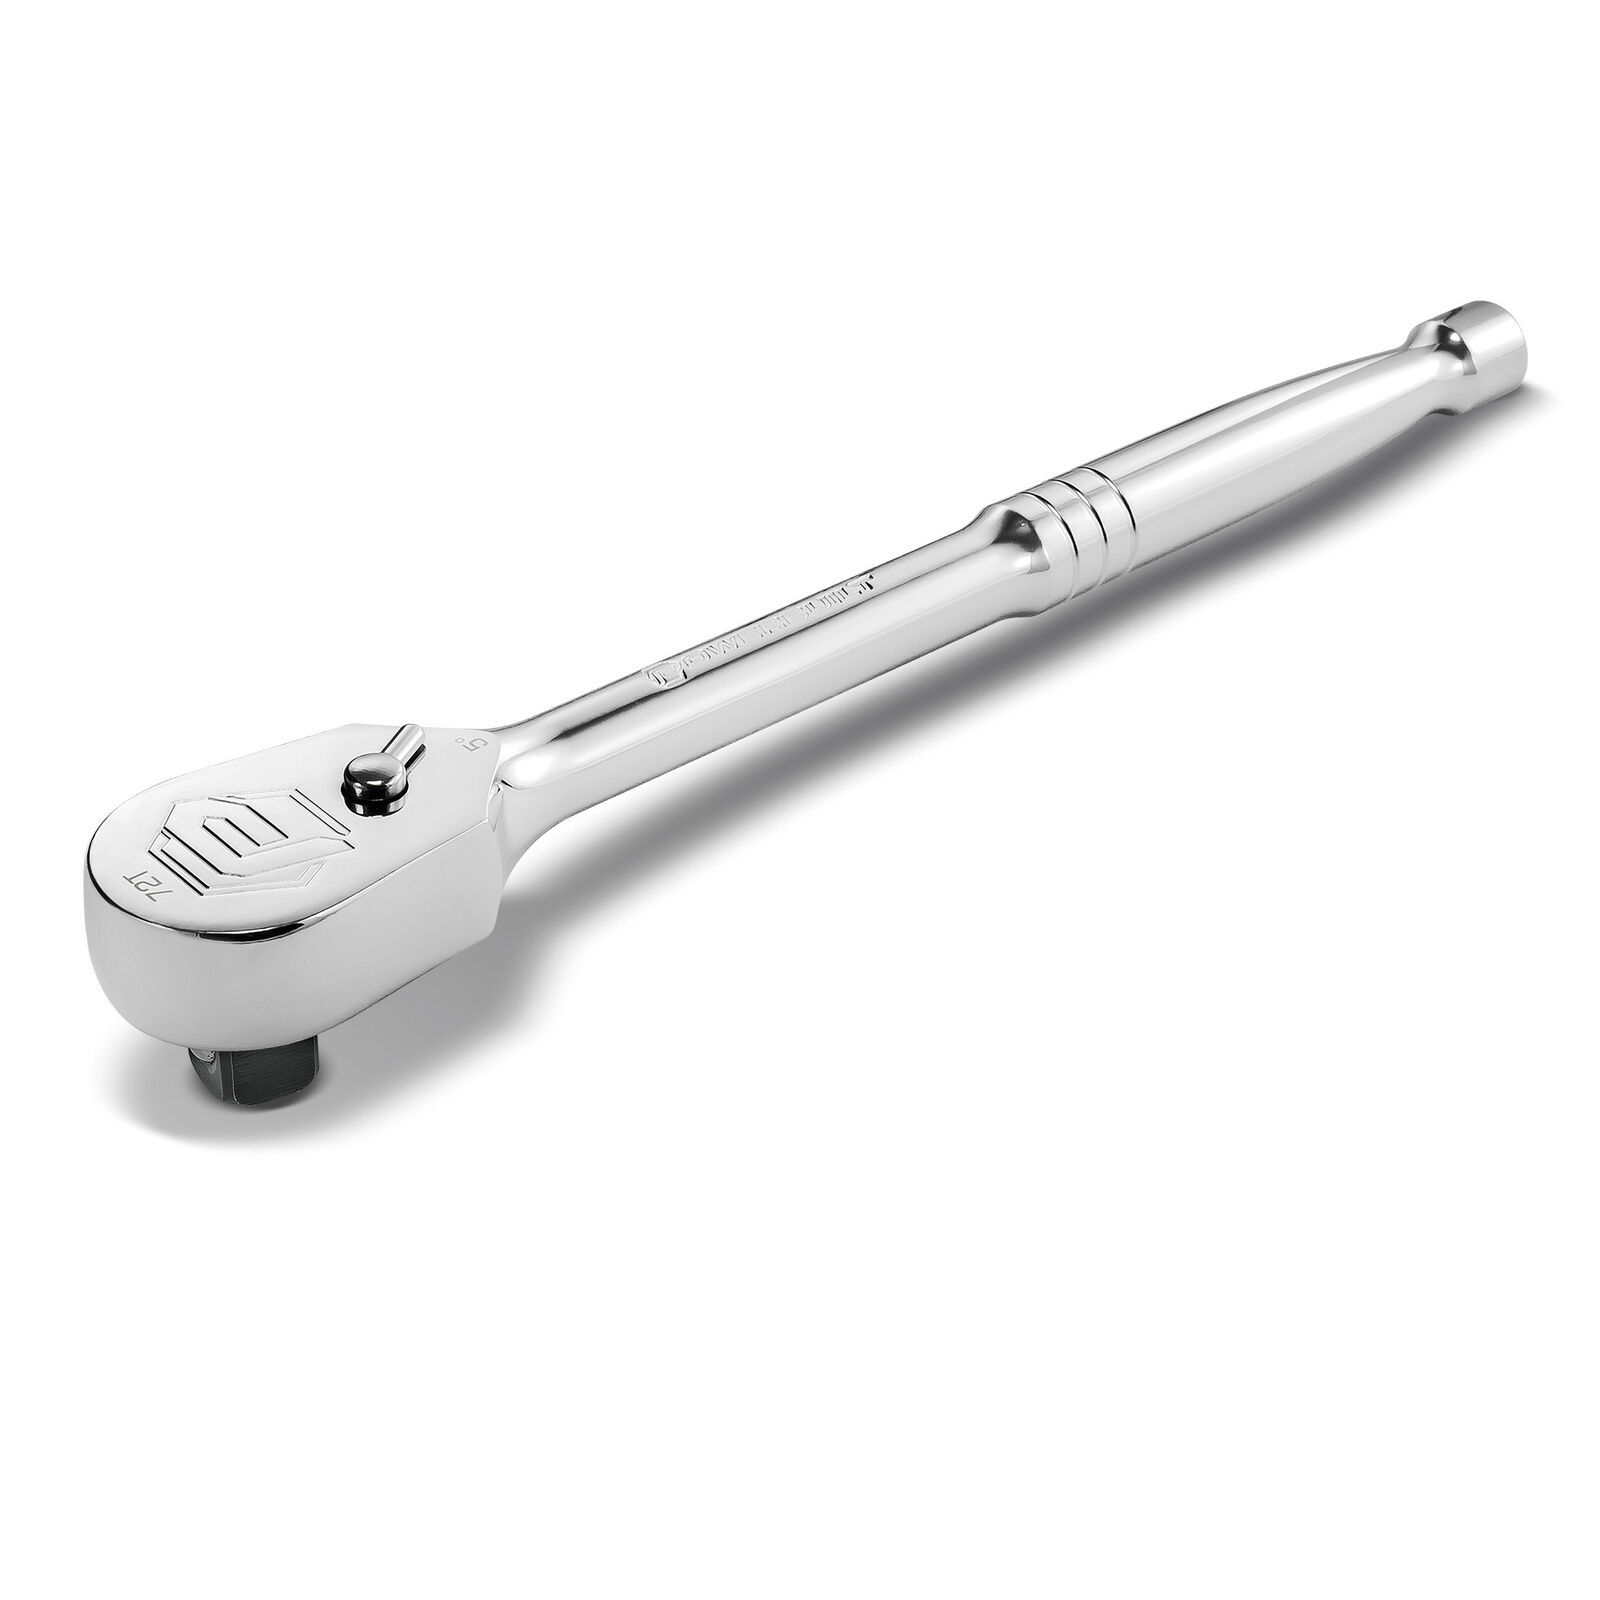 Powerbuilt 1/4 Inch Drive 72 Tooth Sealed Head Ratchet - 649930 - $36.99